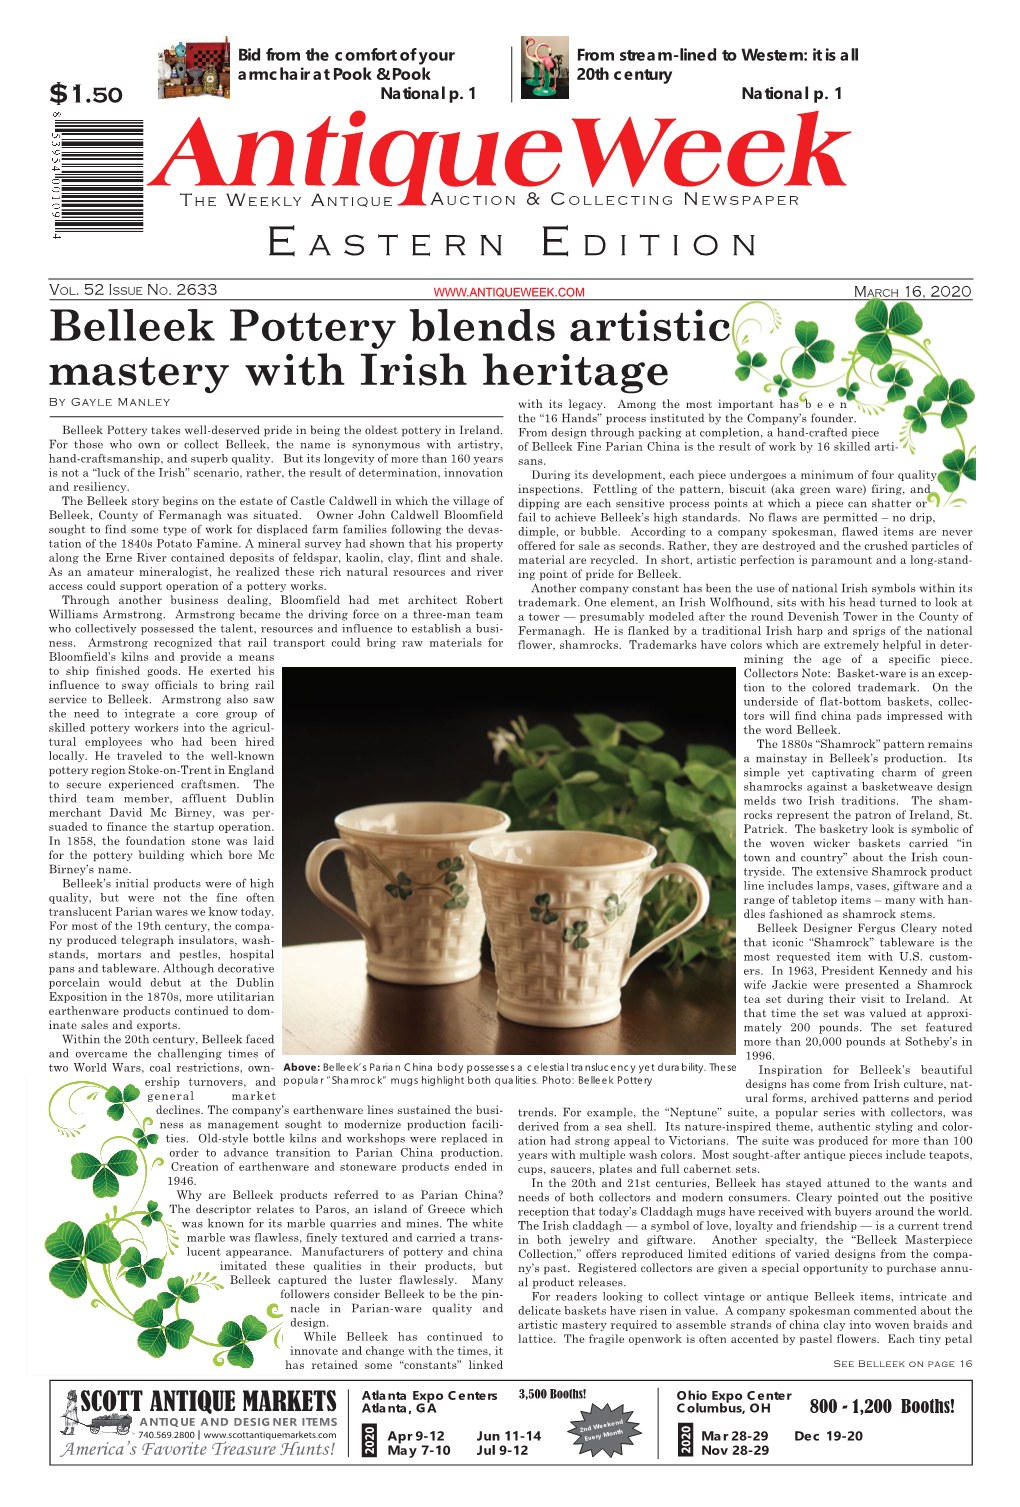 Belleek Pottery Blends Artistic Mastery with Irish Heritage by Gayle Manley with Its Legacy